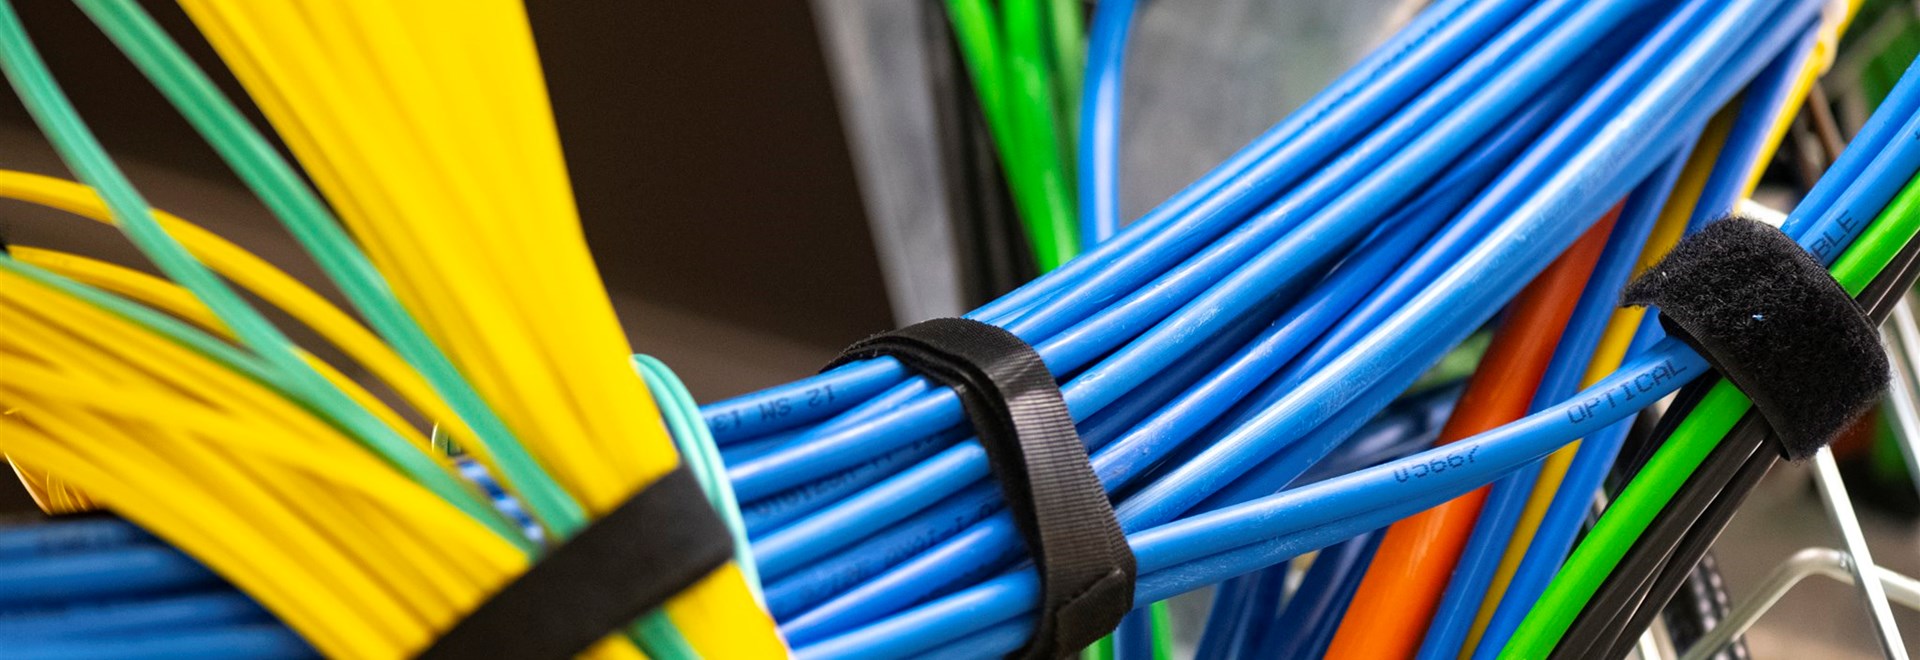 Cable management in a data center